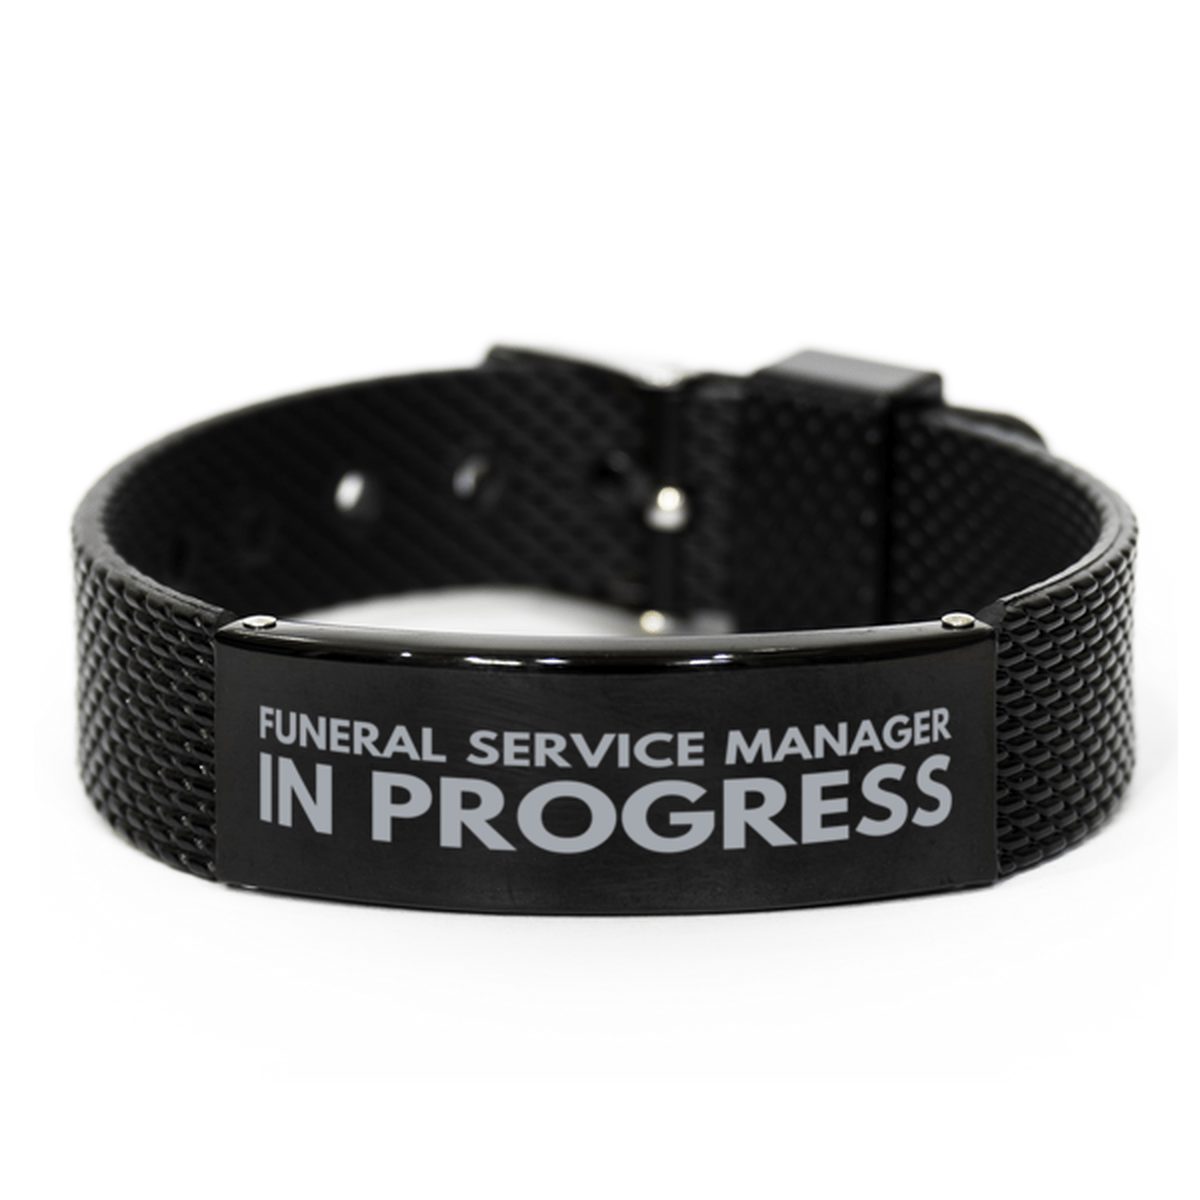 Inspirational Funeral Service Manager Black Shark Mesh Bracelet, Funeral Service Manager In Progress, Best Graduation Gifts for Students